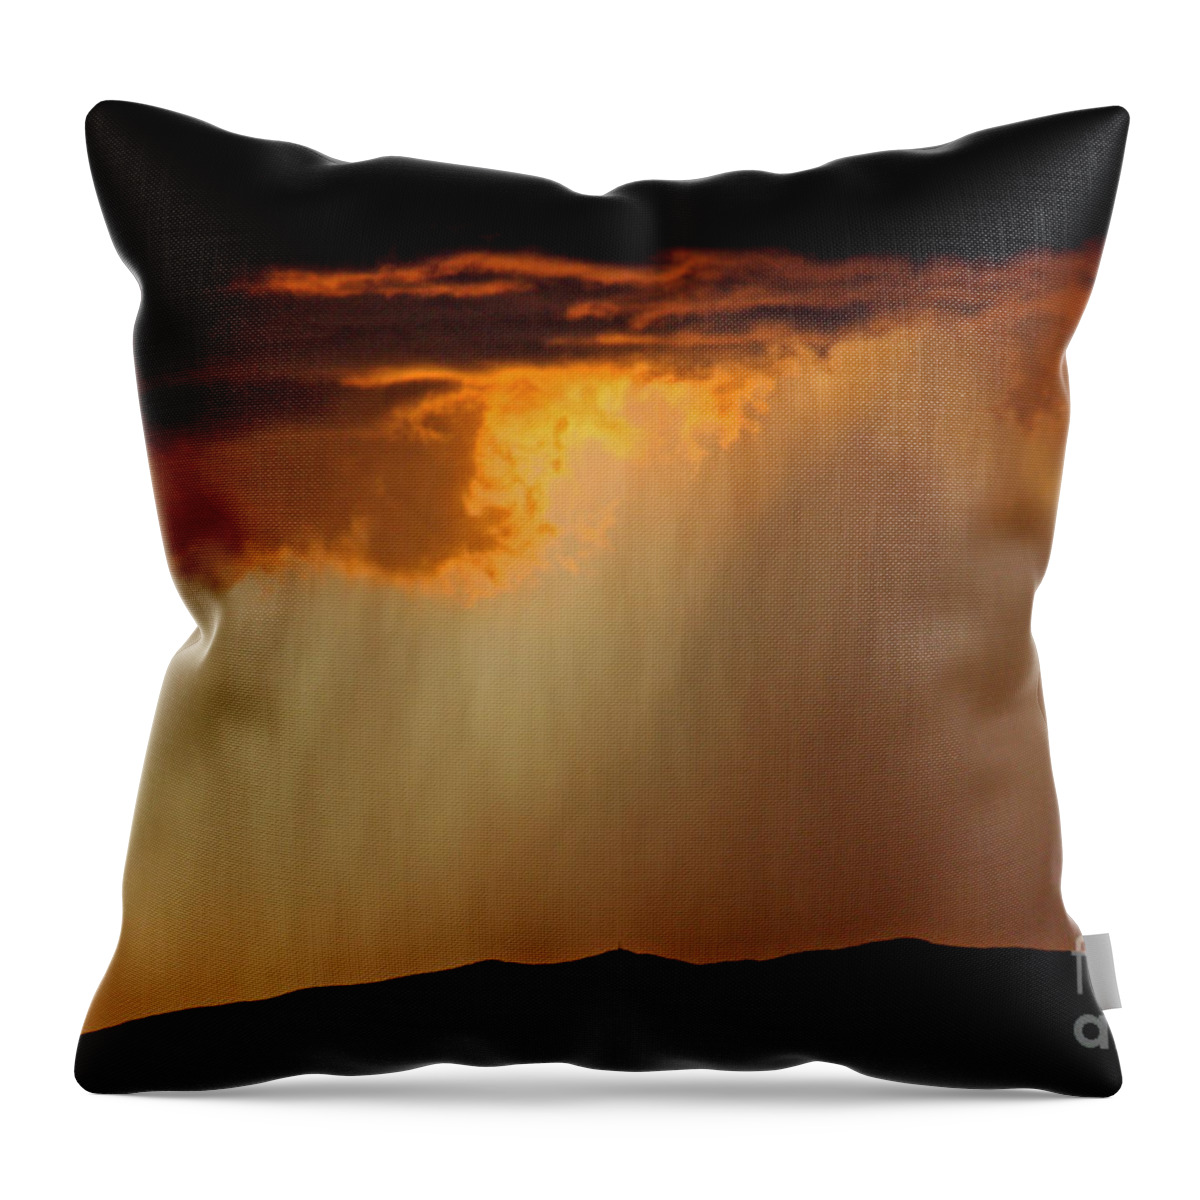 Thunderstorms Throw Pillow featuring the photograph Sunset Thunderstorm by John Langdon